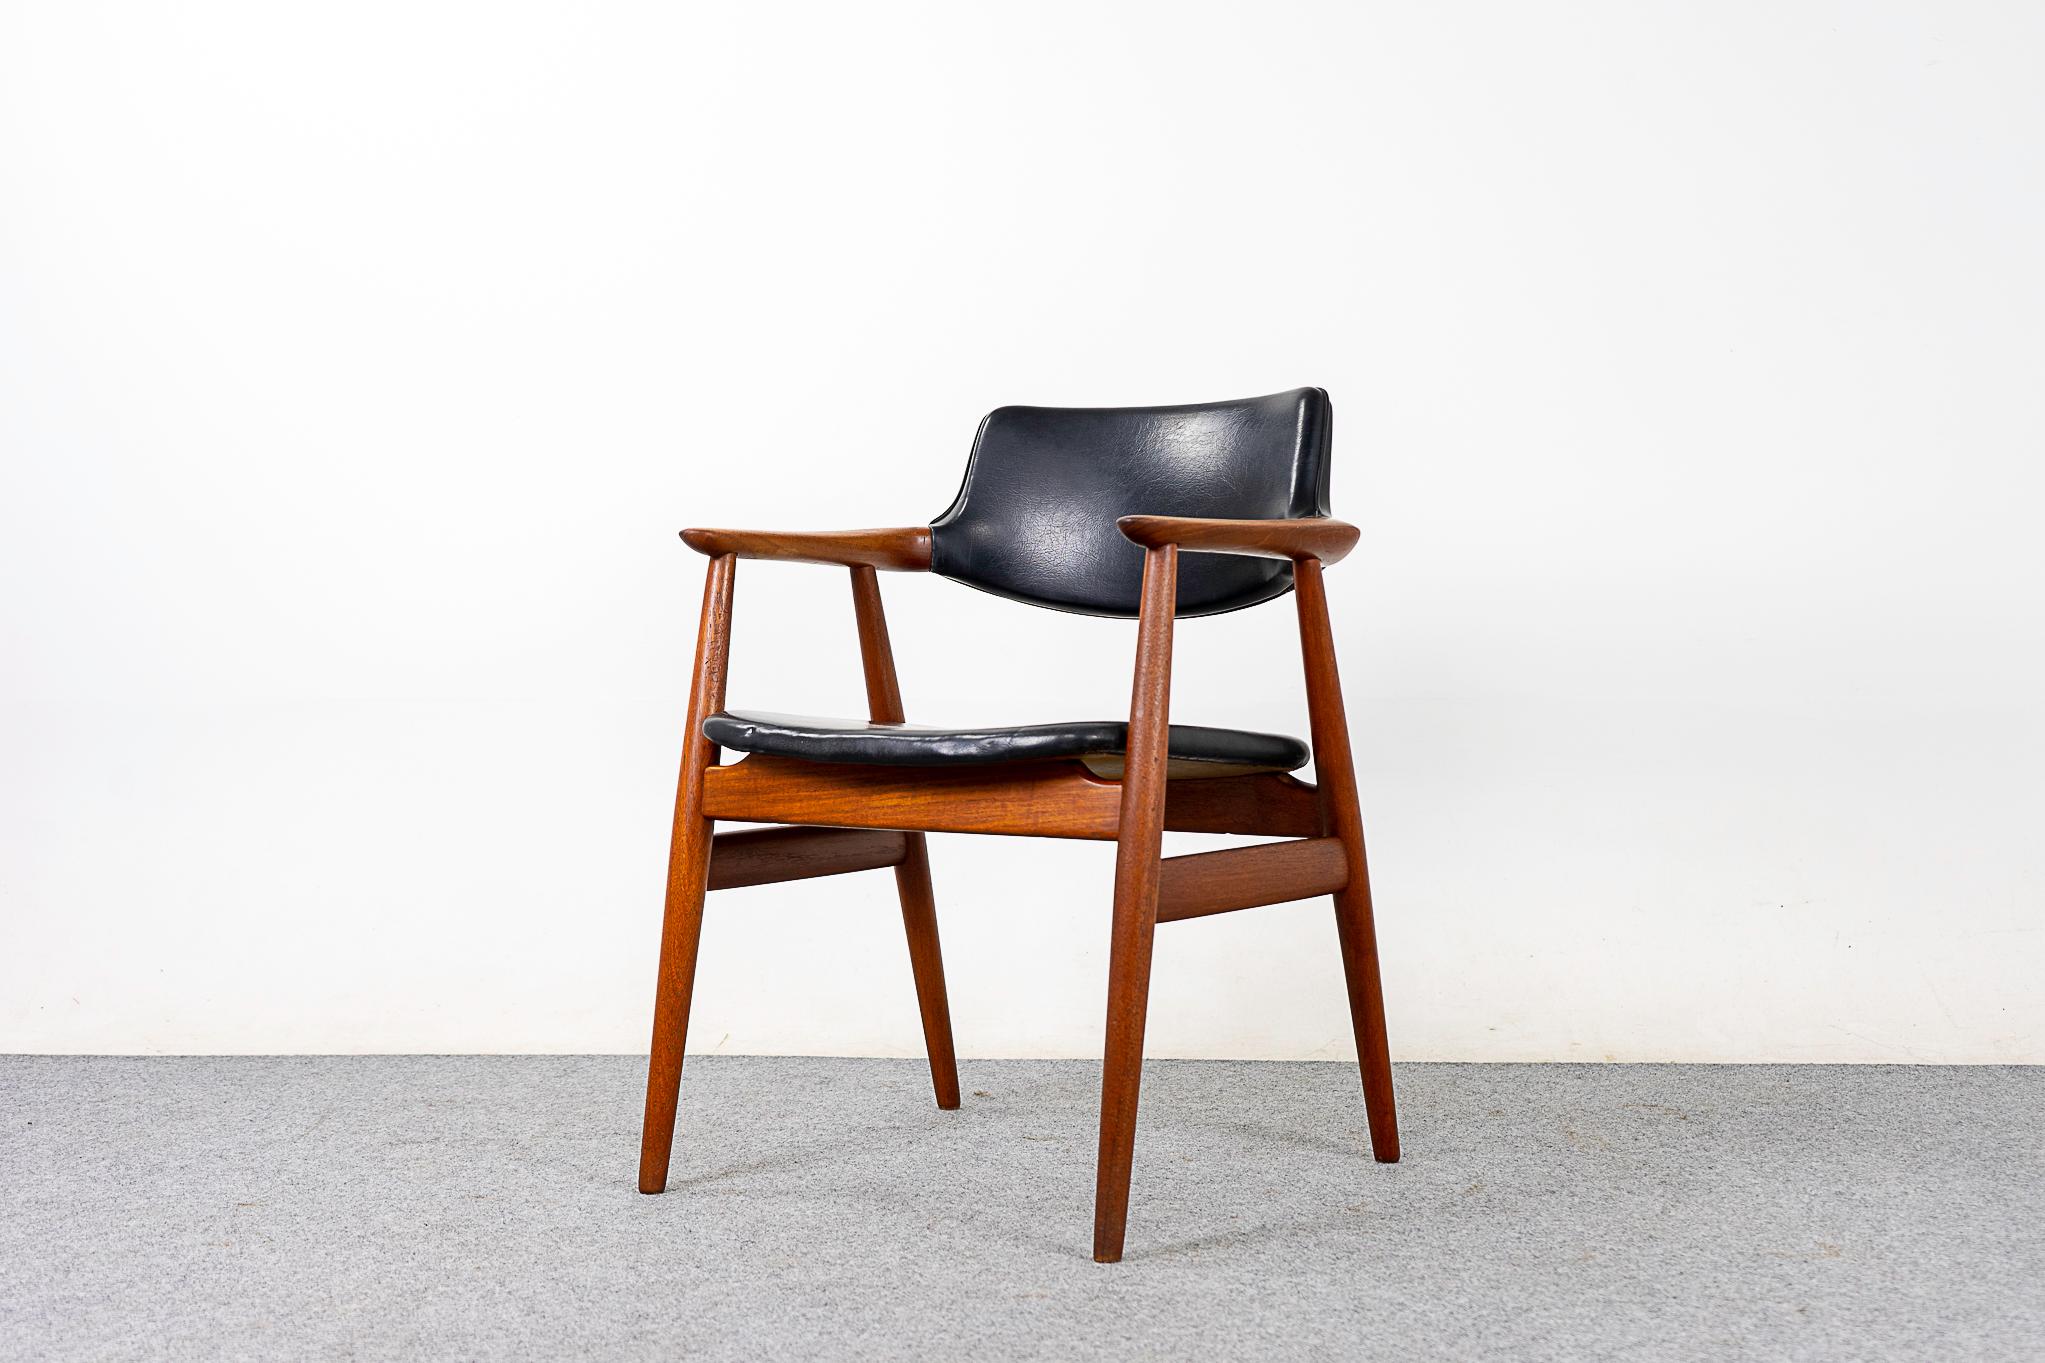 Teak and vinyl model GM11 armchair by Svend Aage Eriksen for Glostrup, circa 1960's. Beautifully sculpted elegant frame with swooping arms, perfectly scaled for any room!